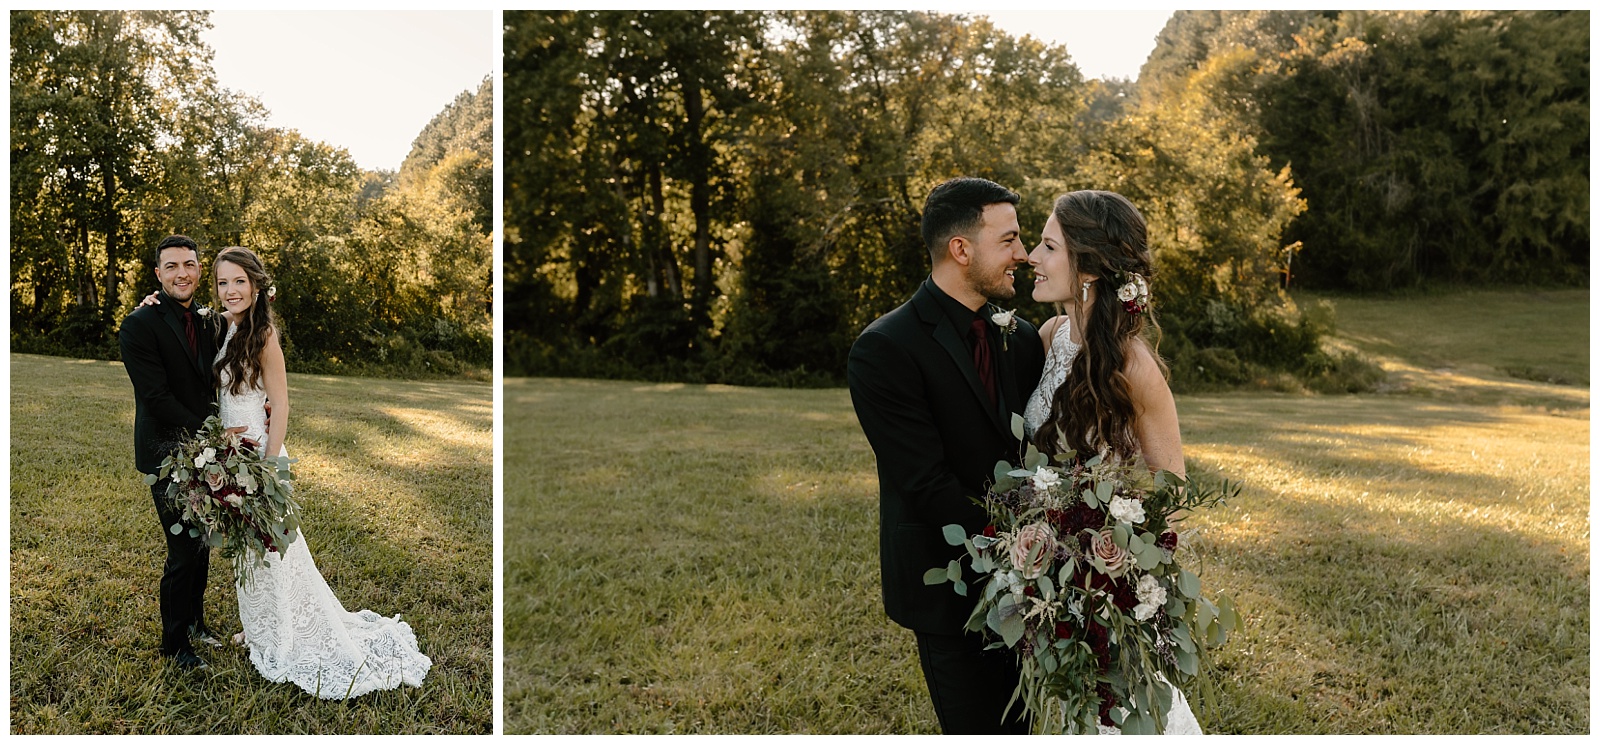 Sunset portraits of Bride and groom in wedding attire holding each other close for wedding portraits in a field in North Carolina. The bride is wearing a boho lace sheath dress and holding a large bouquet with maroon, wine, bordeaux, cream, and desert rose flowers.